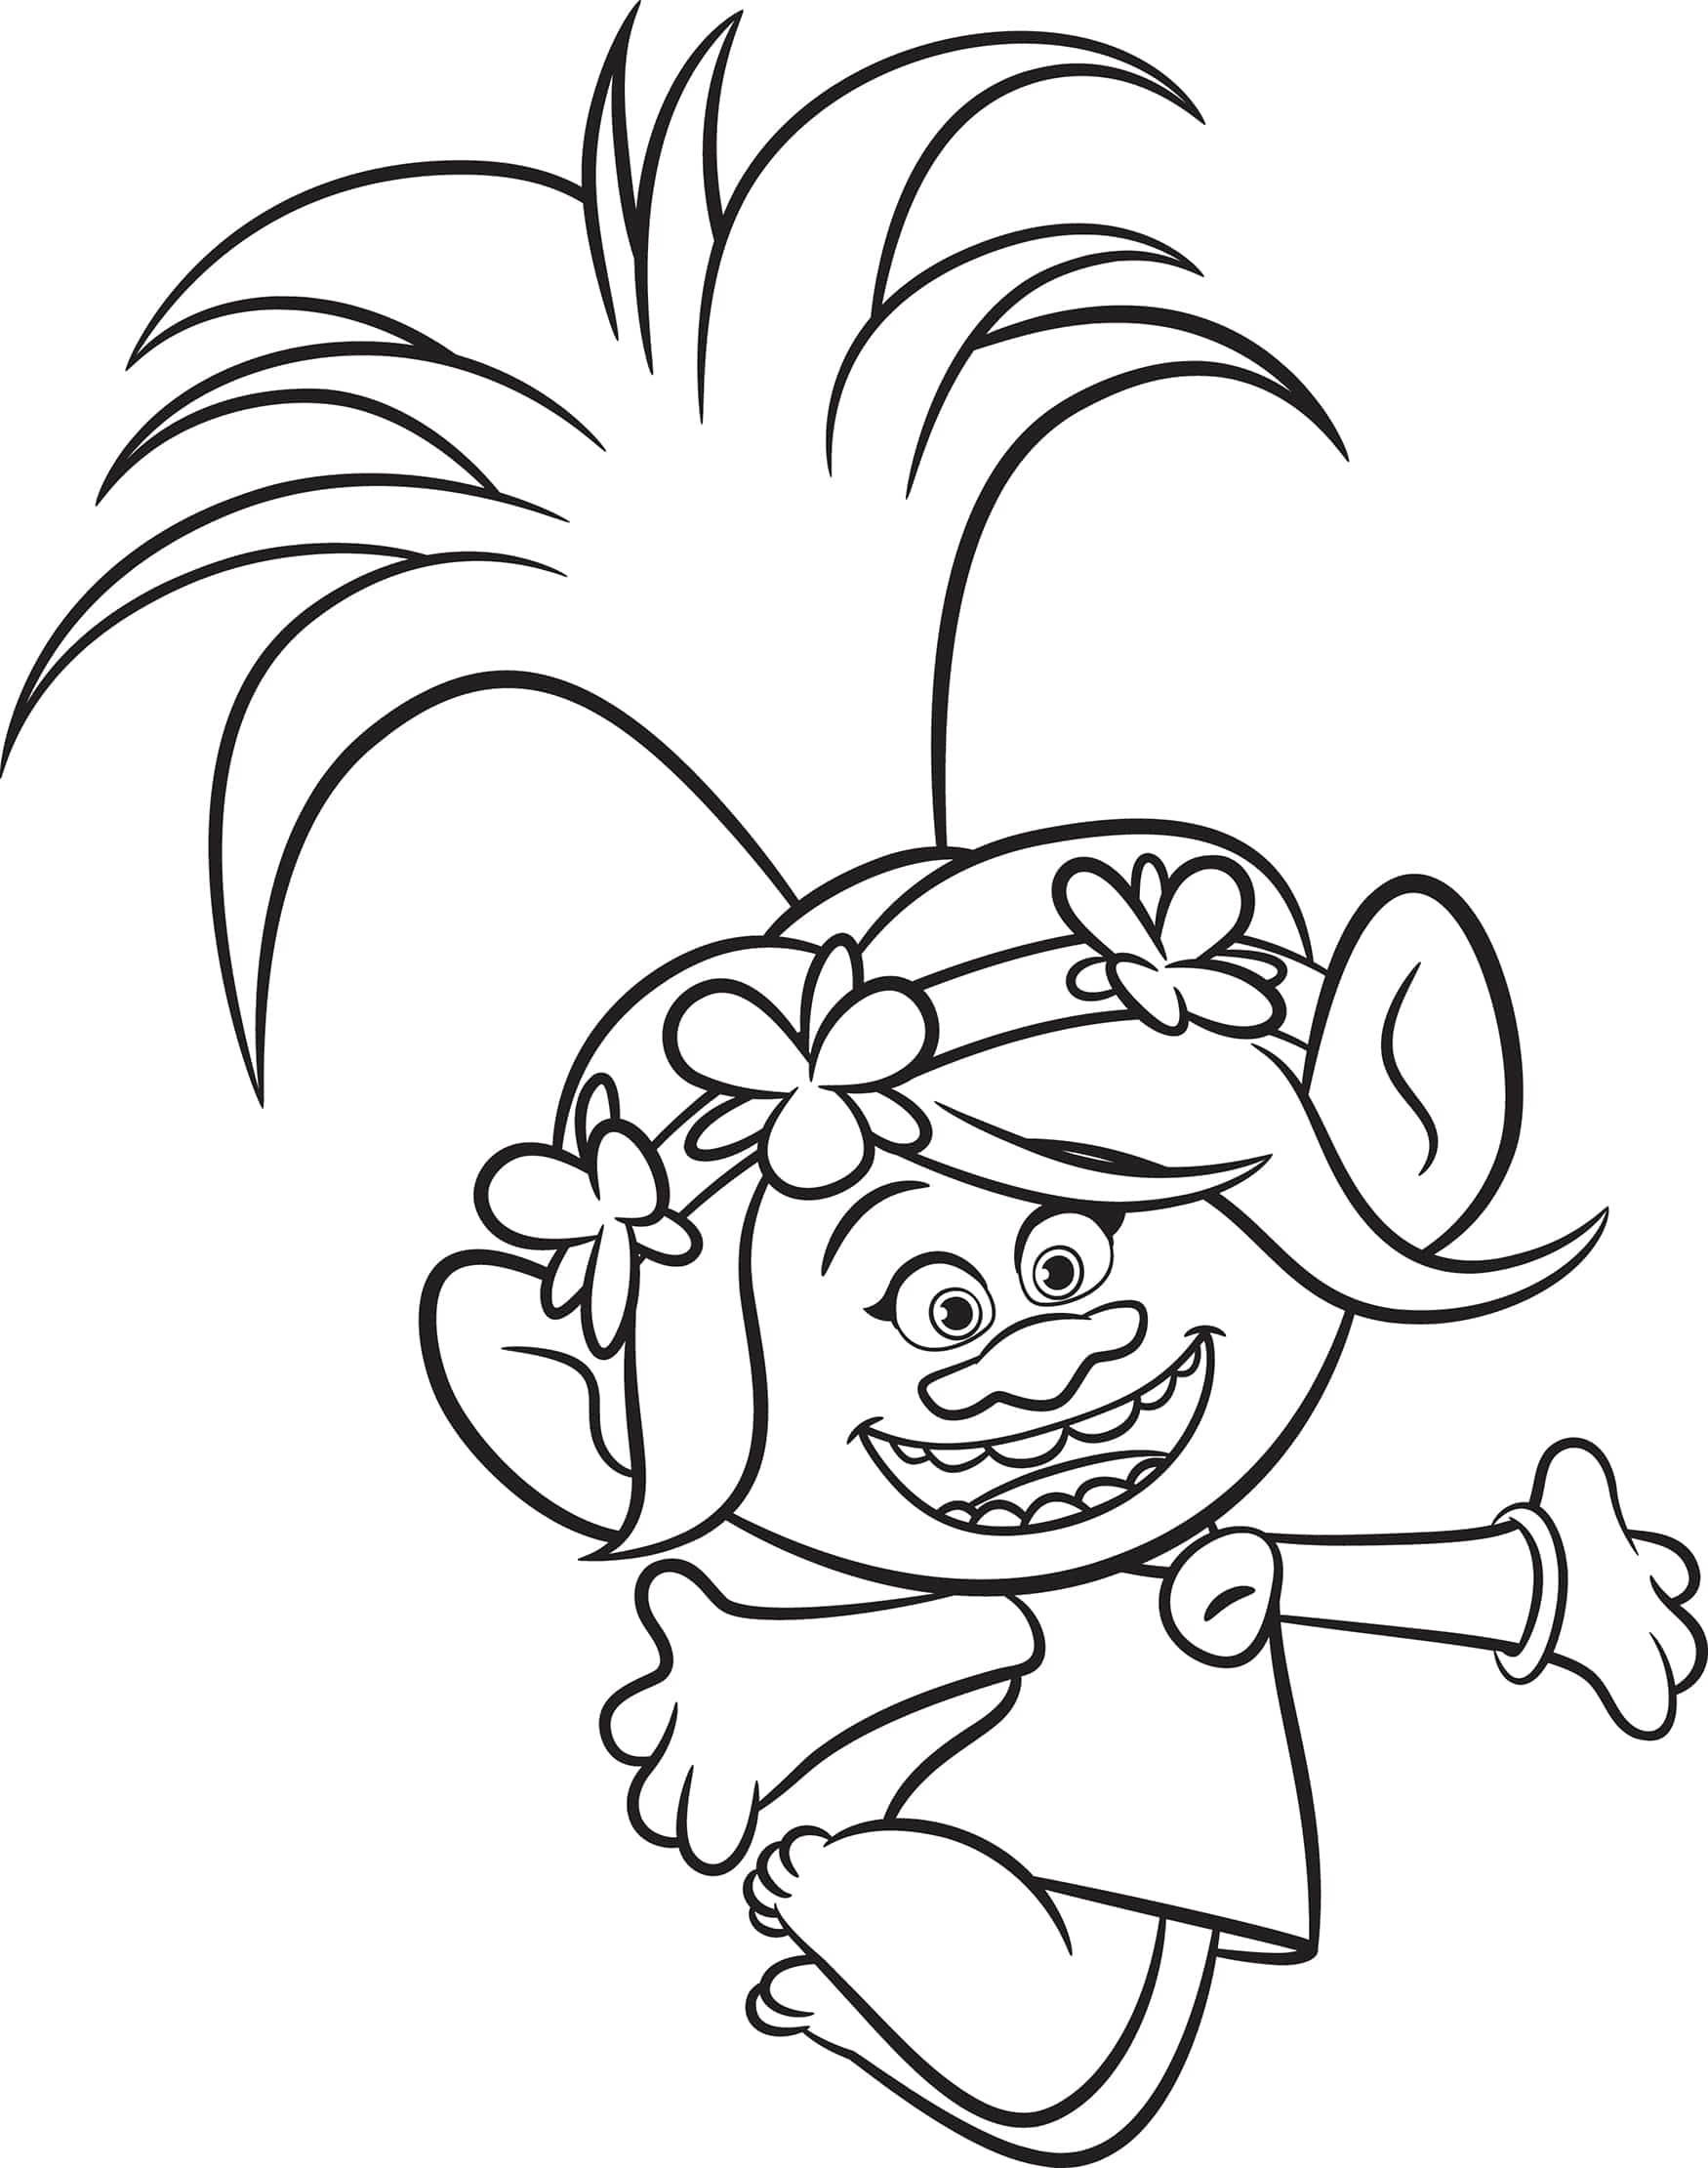 Trolls Printable Coloring Pages
 DreamWorks Trolls Party Edition Princess Poppy Inspired